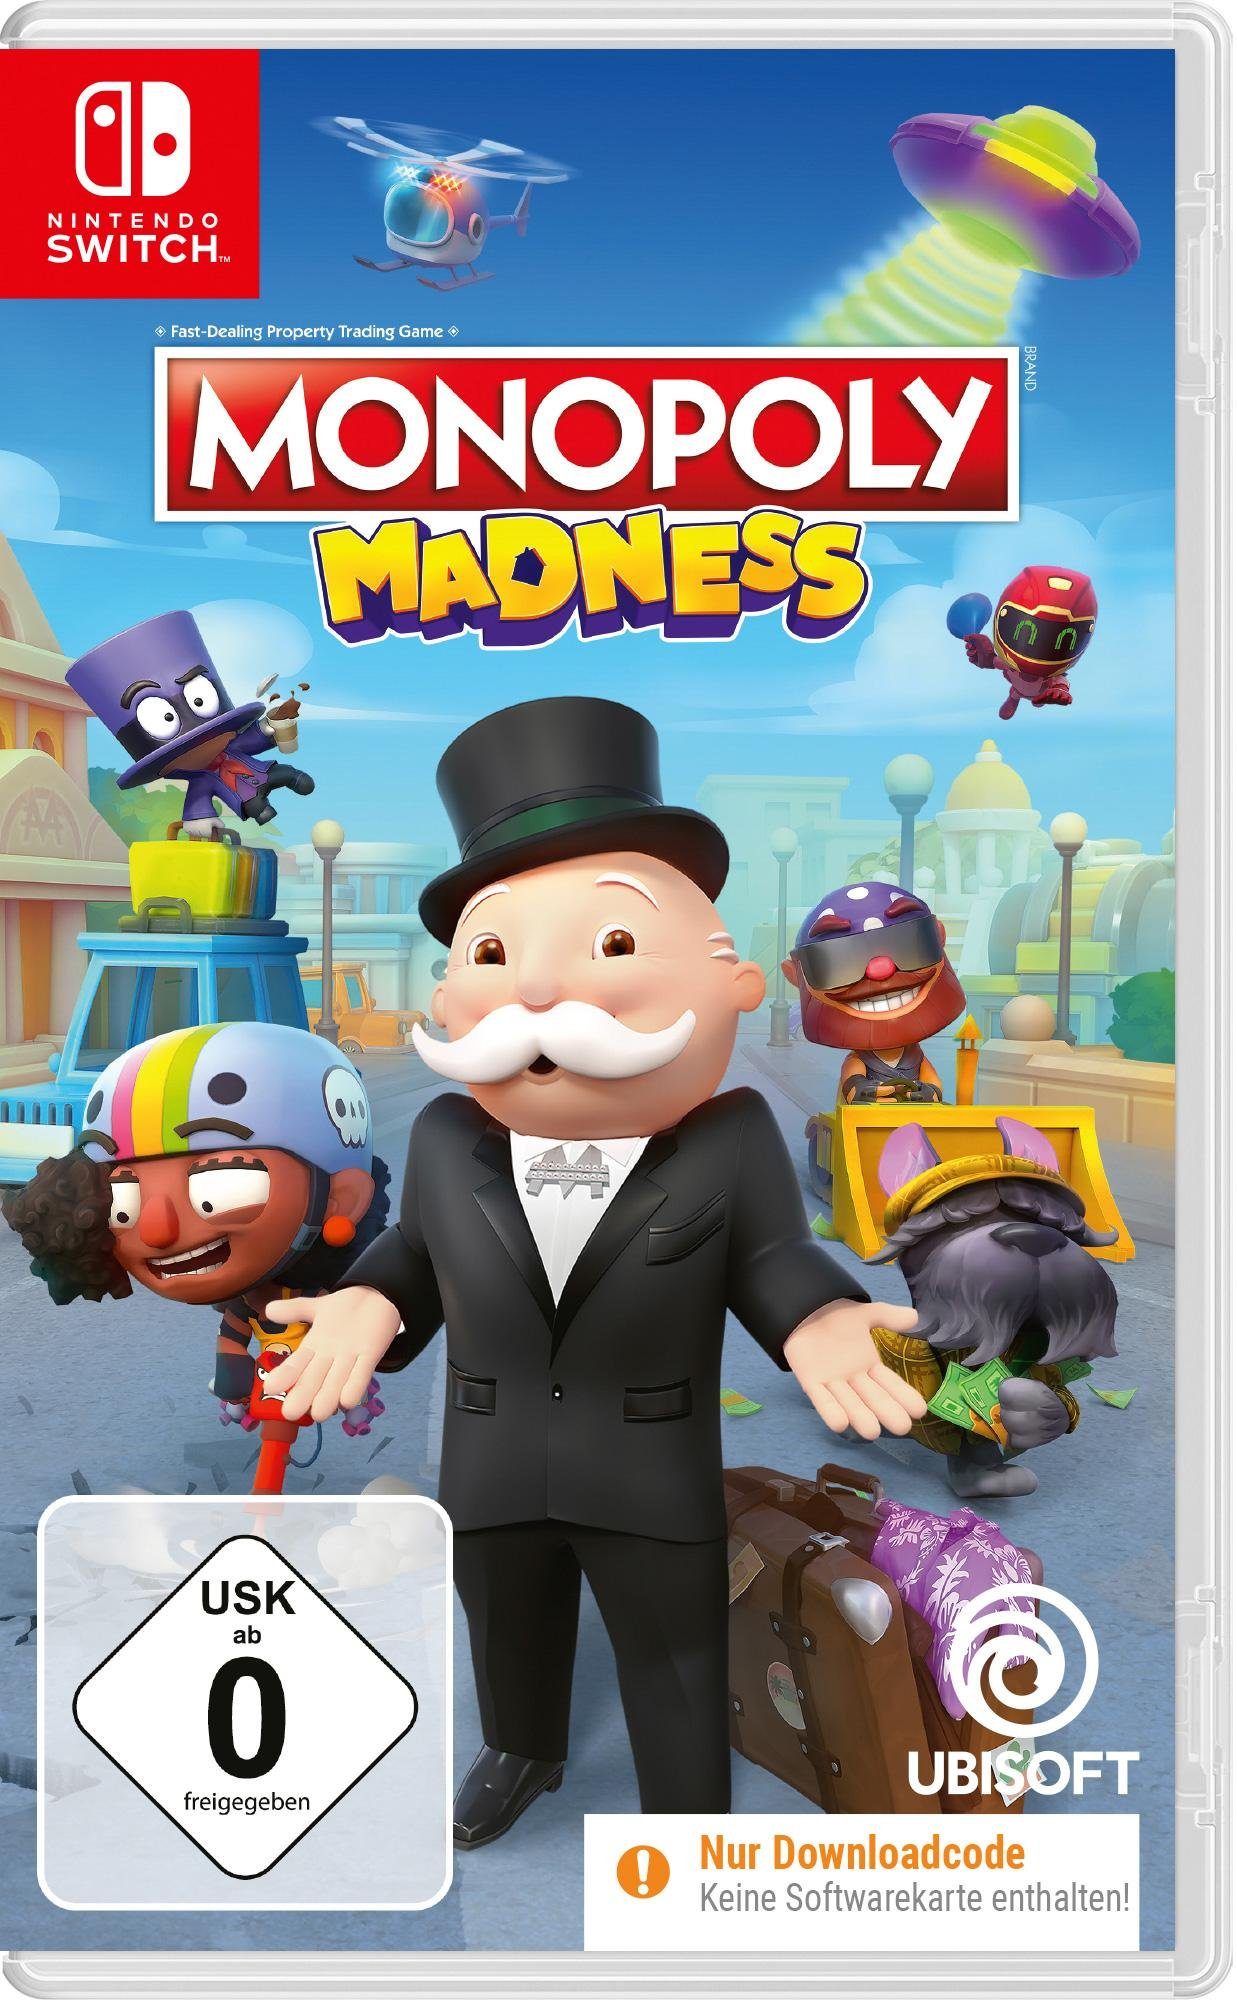 Madness Nintendo Monopoly Switch-Spiel (Download-Code)